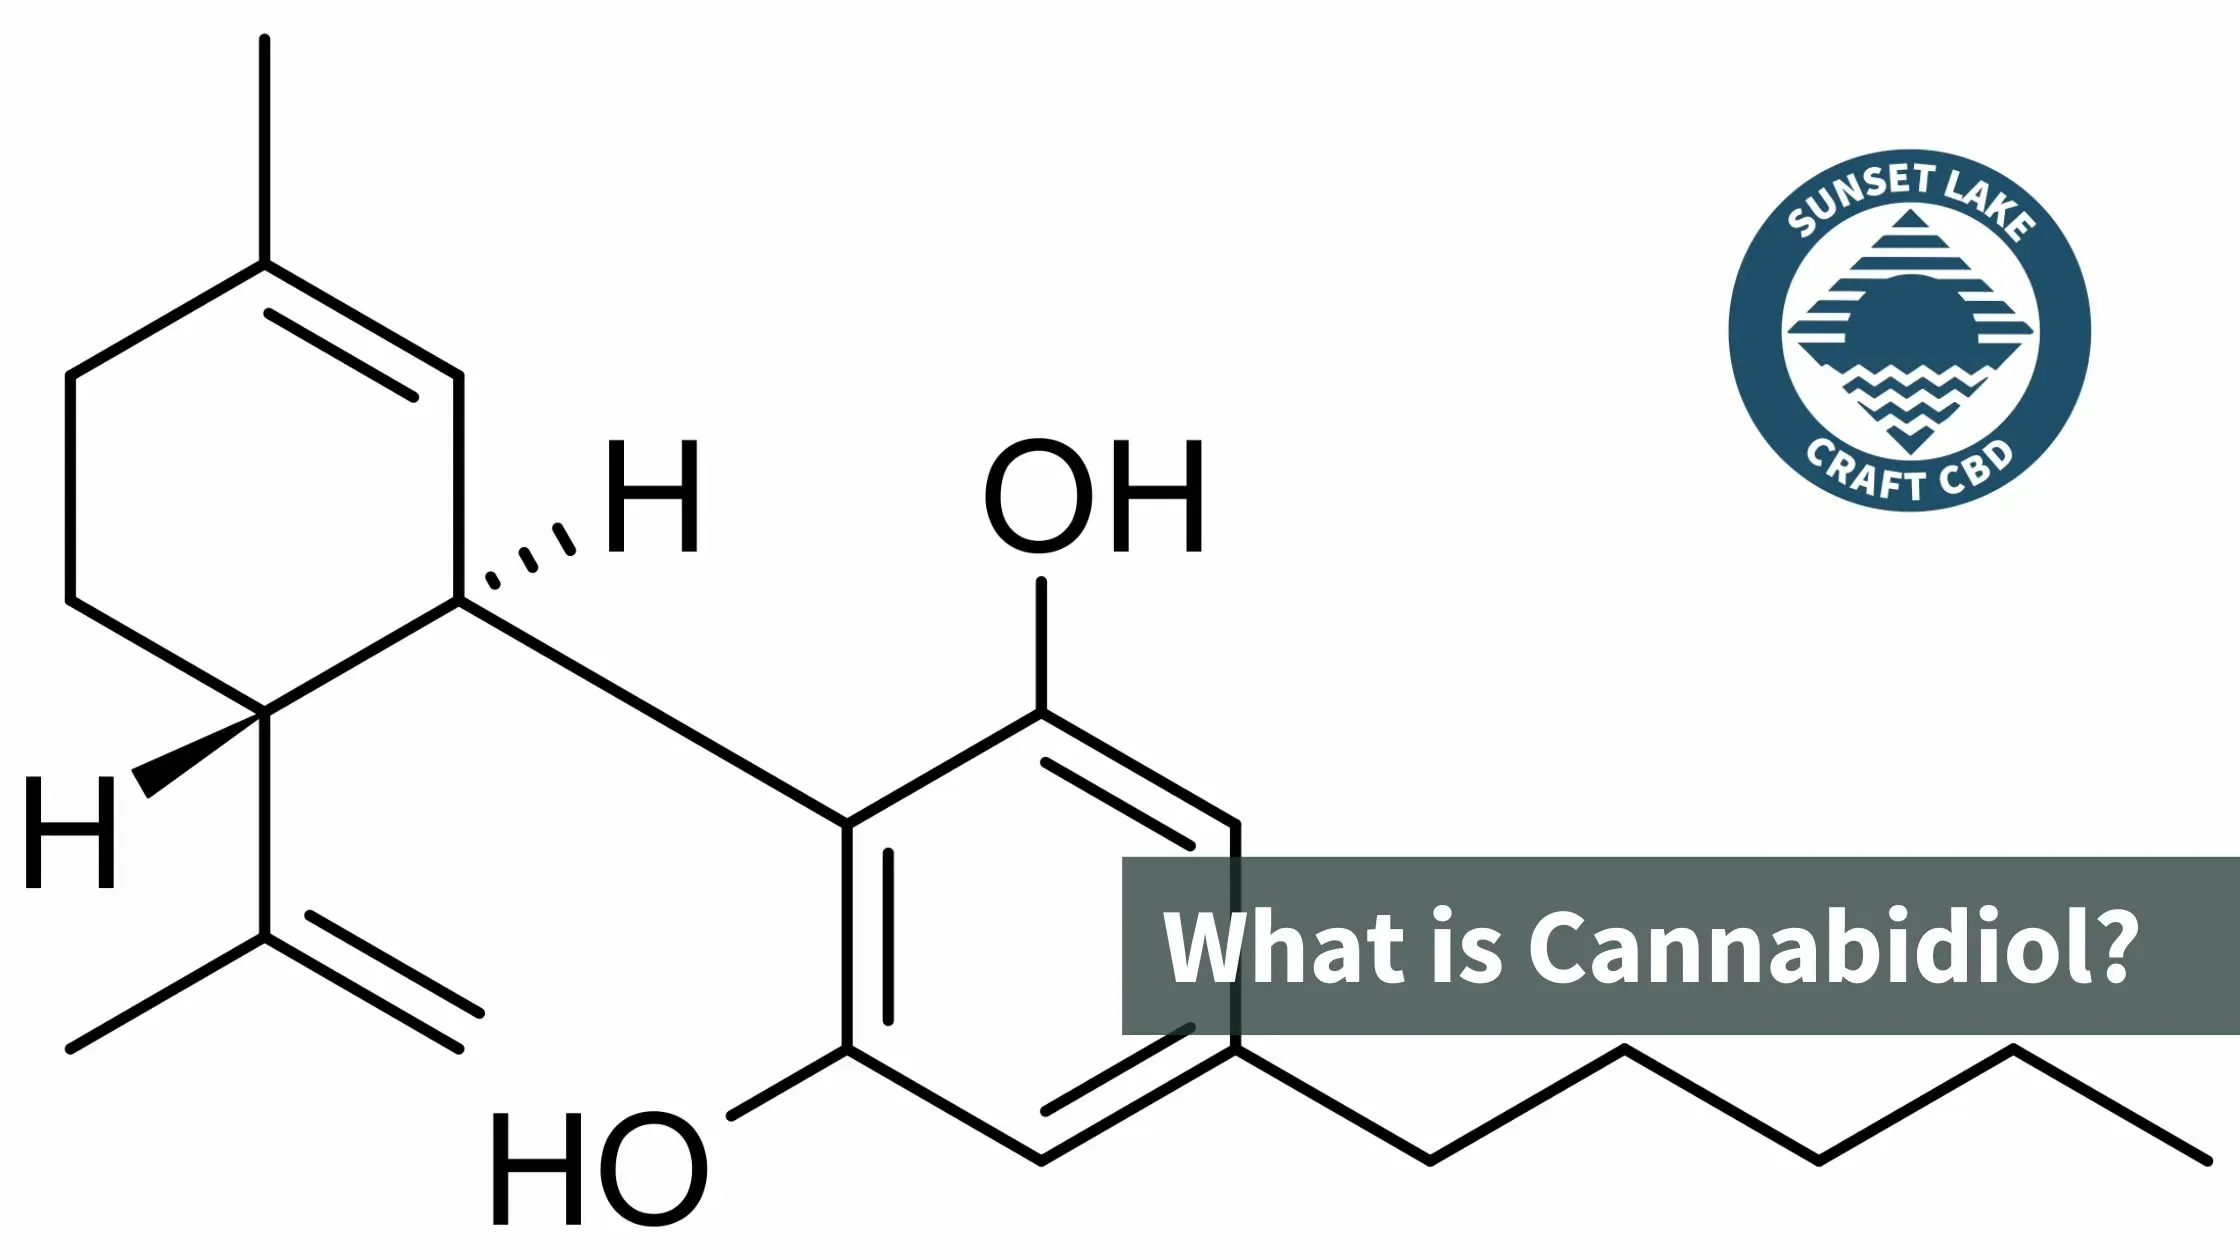 A model of Cannabidiol with text that reads "What is Cannabidiol?"